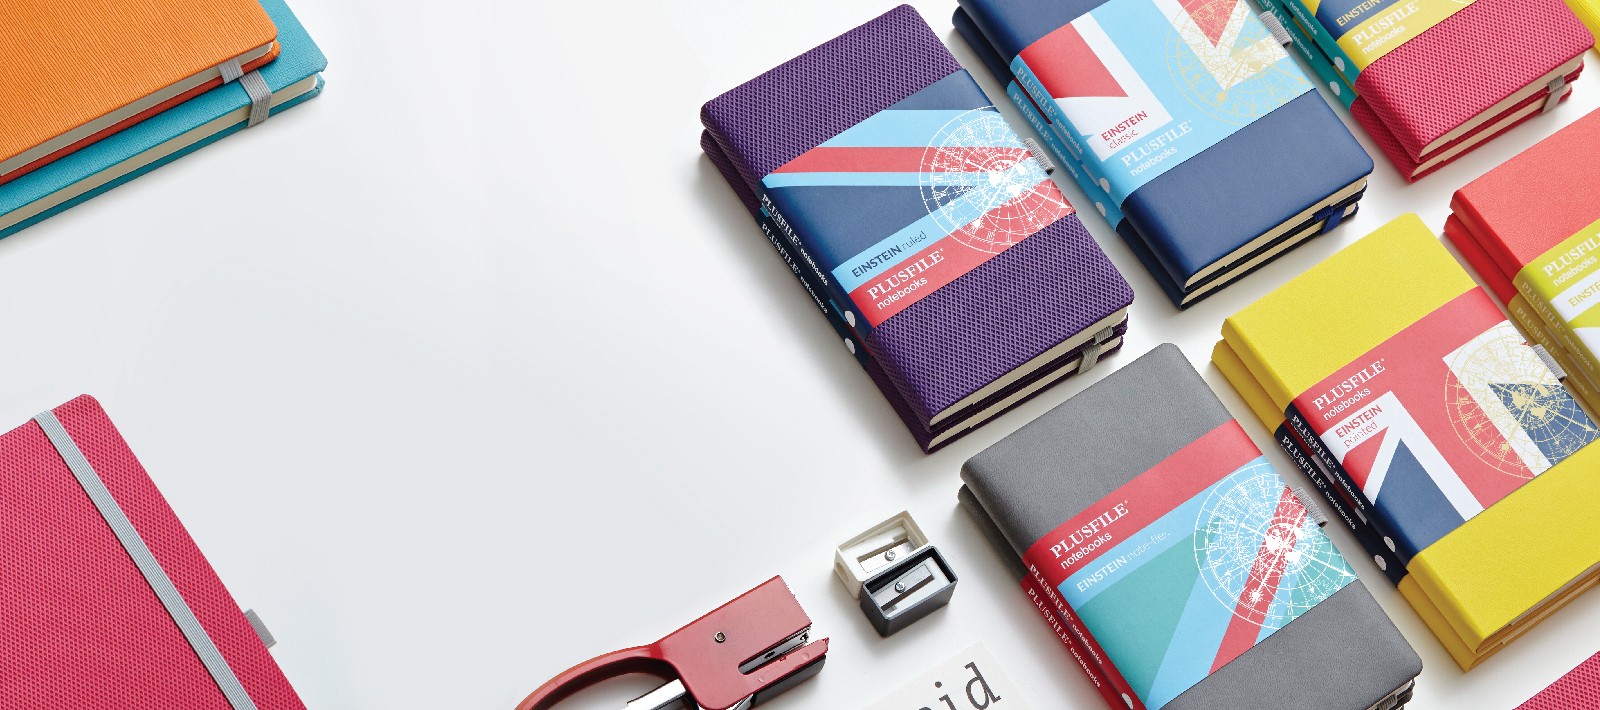 Brand strategy for a stationery brand